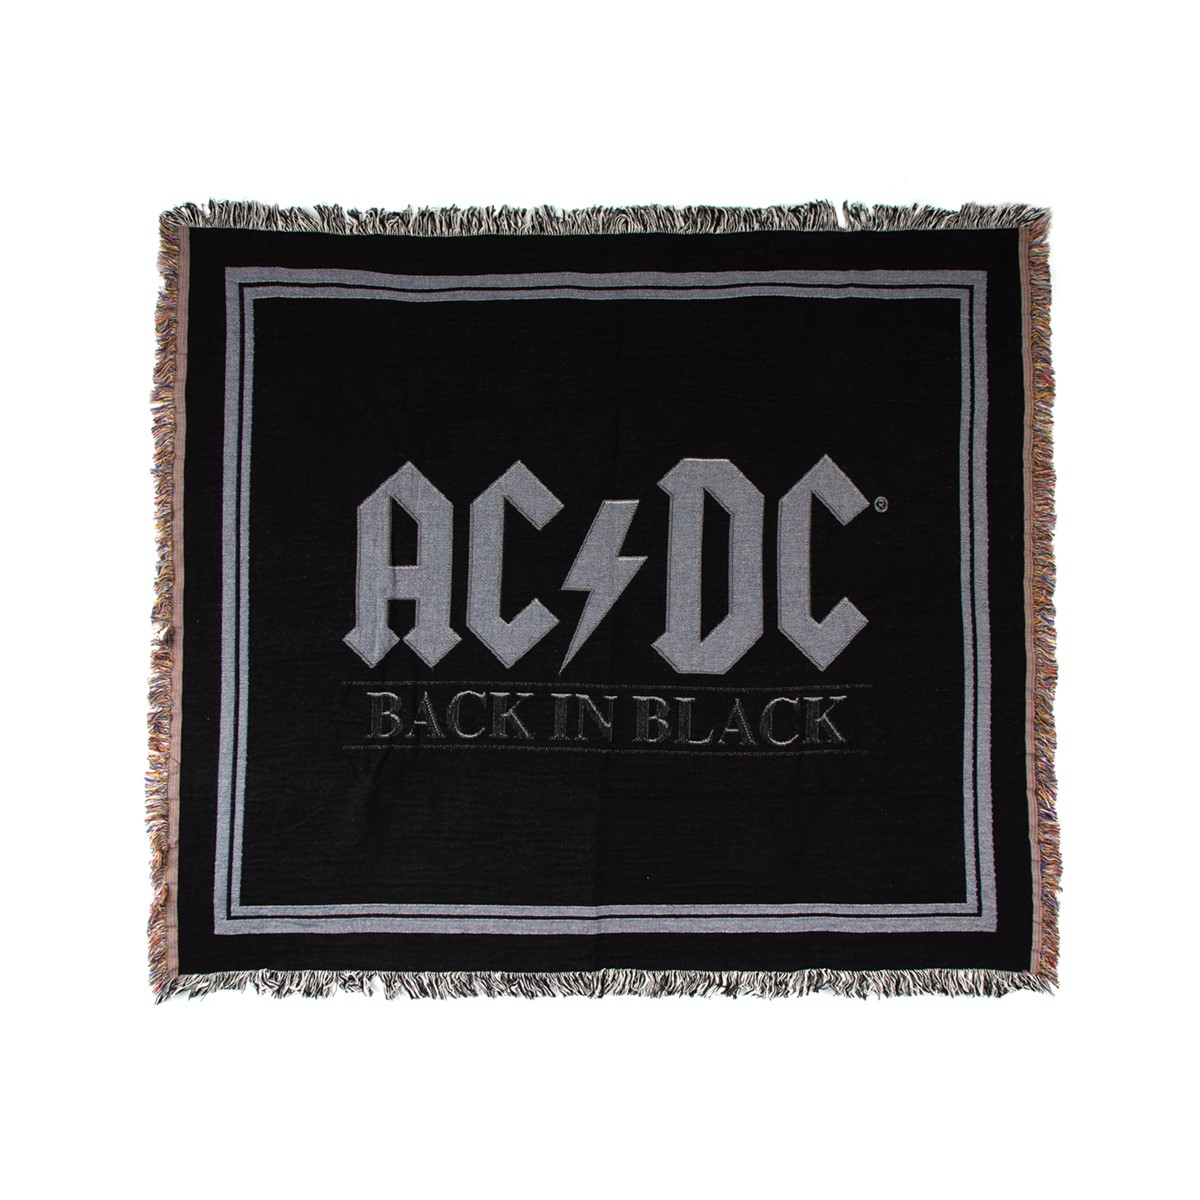 ACDC back In Black merch